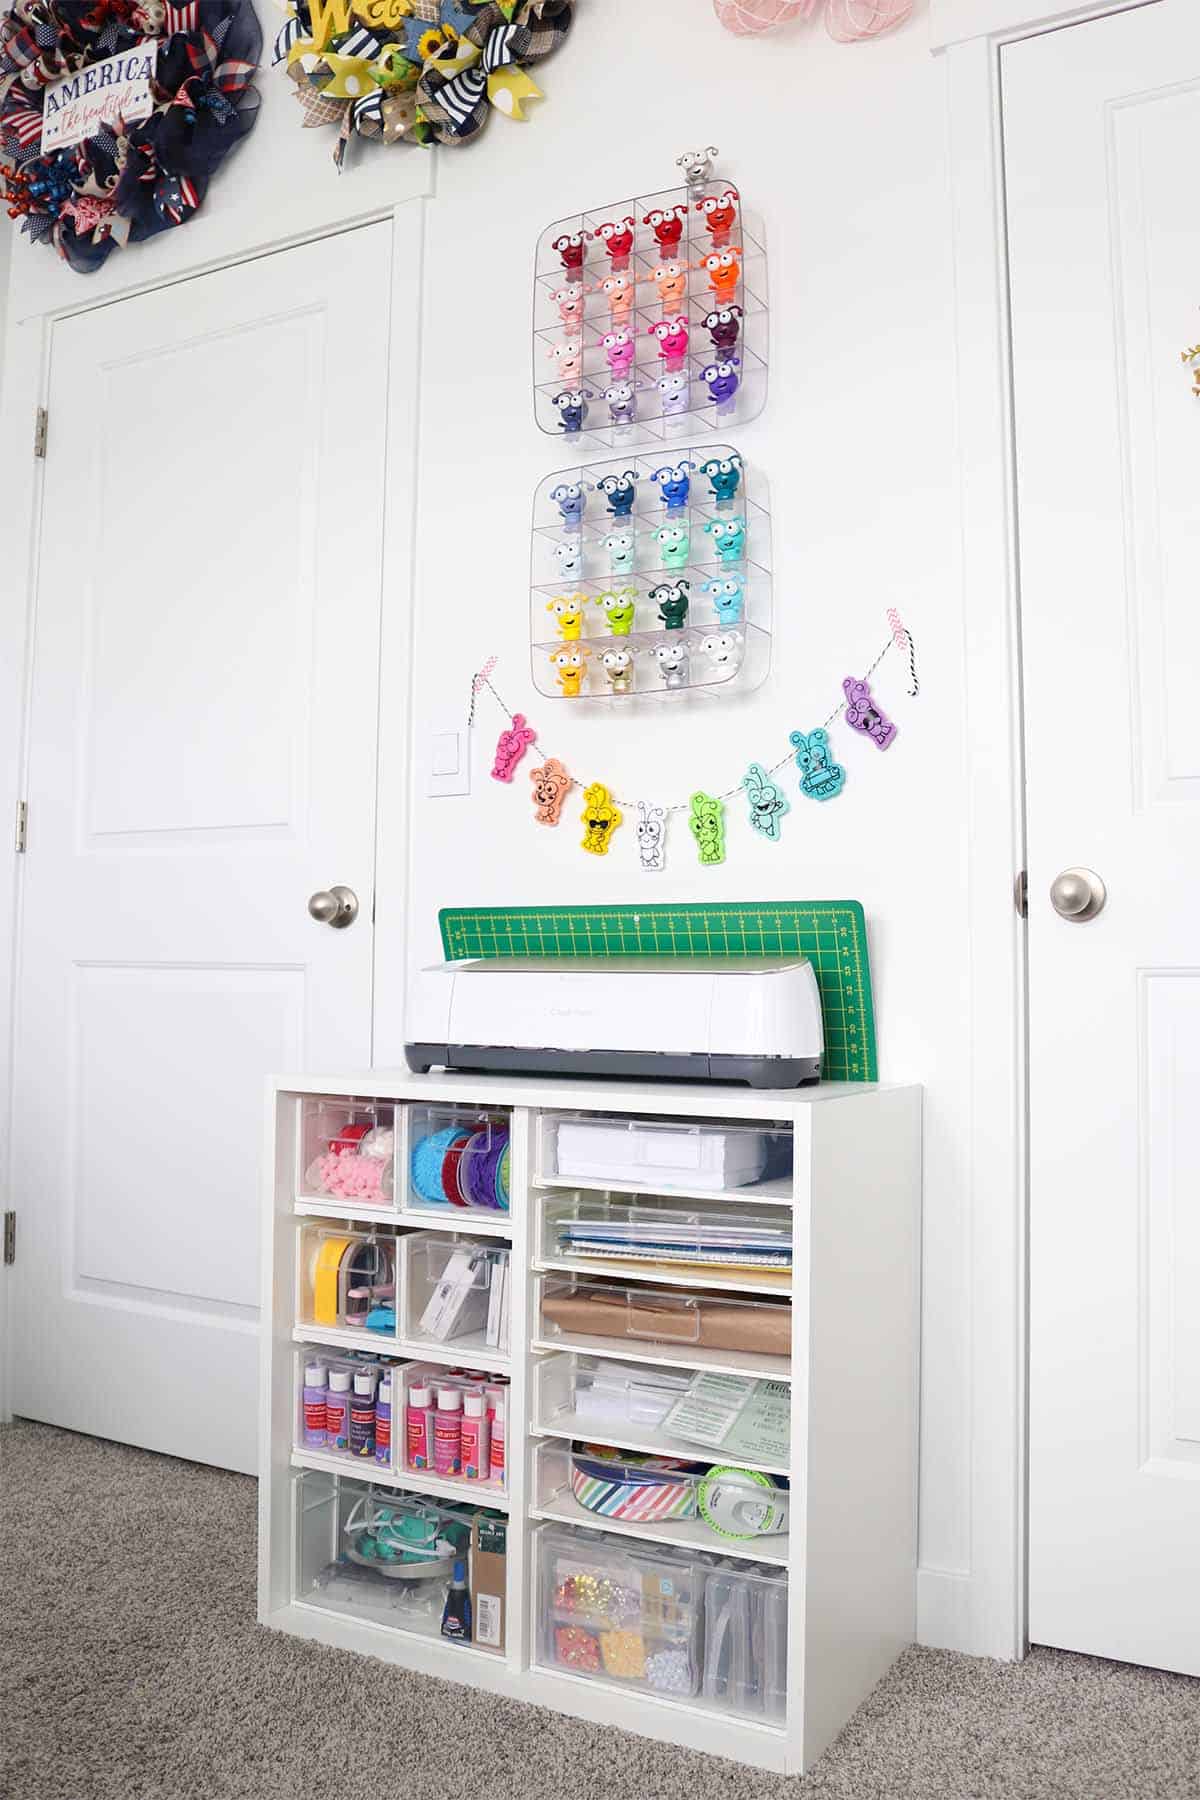 Create Room Cubby reveal photos and my honest review. Plus, a peek at what's inside!